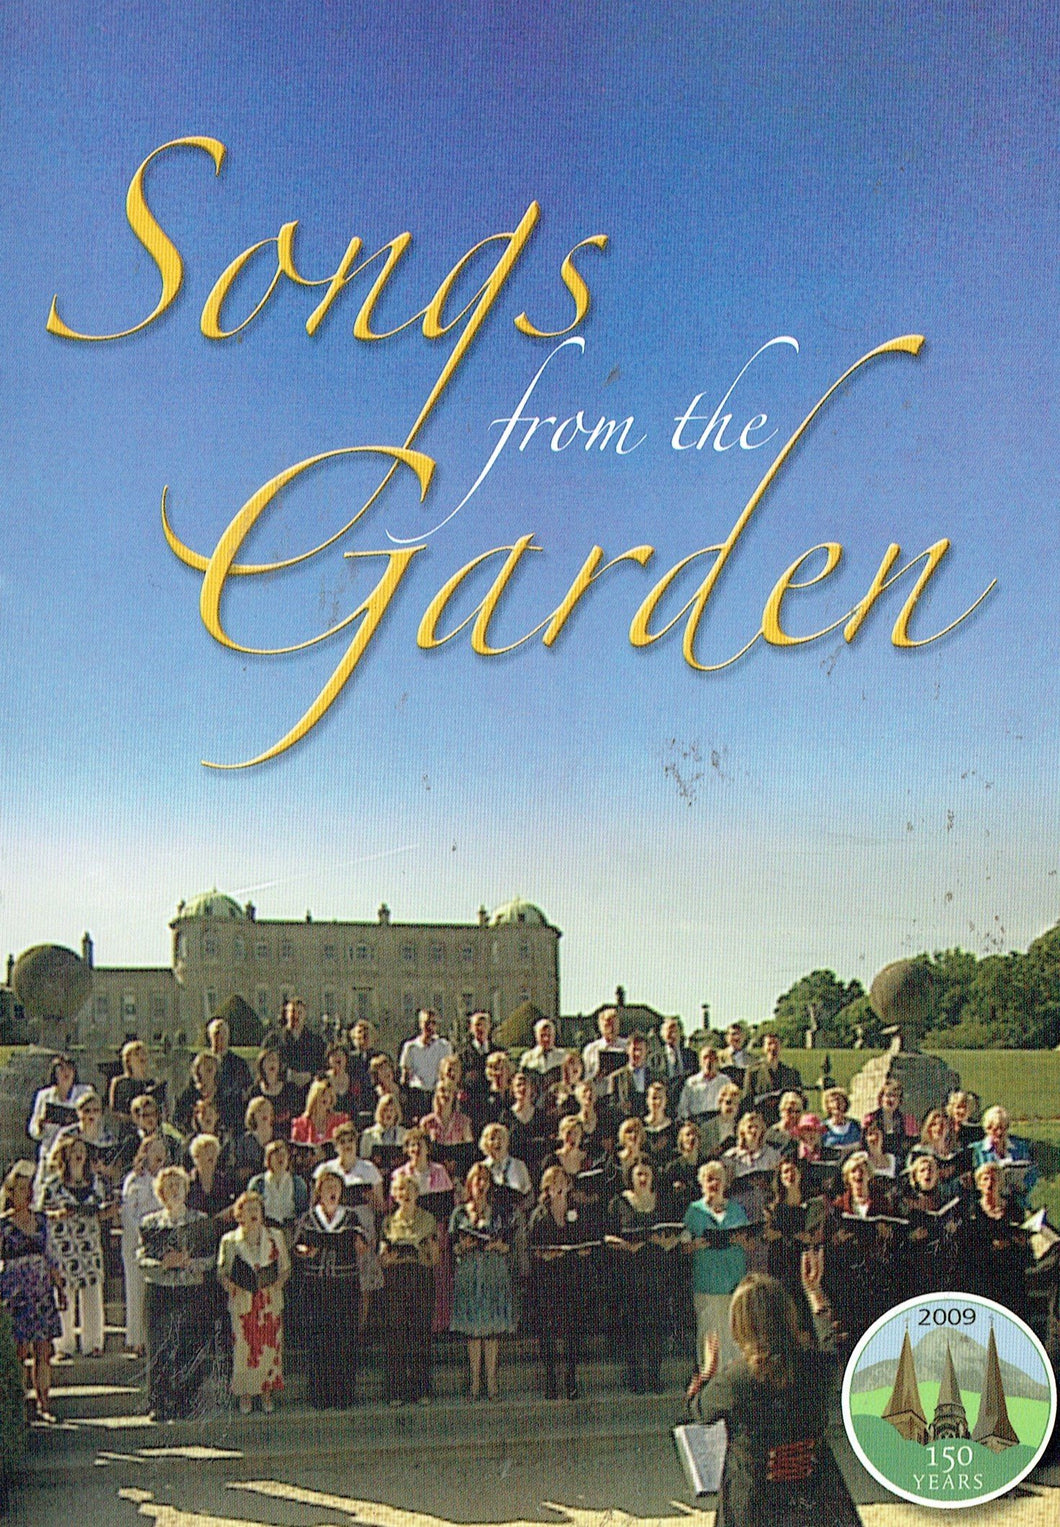 Songs from the Garden: St Mary's, St Patrick's and St. Brigid's churches, Enniskerry - 150 Years